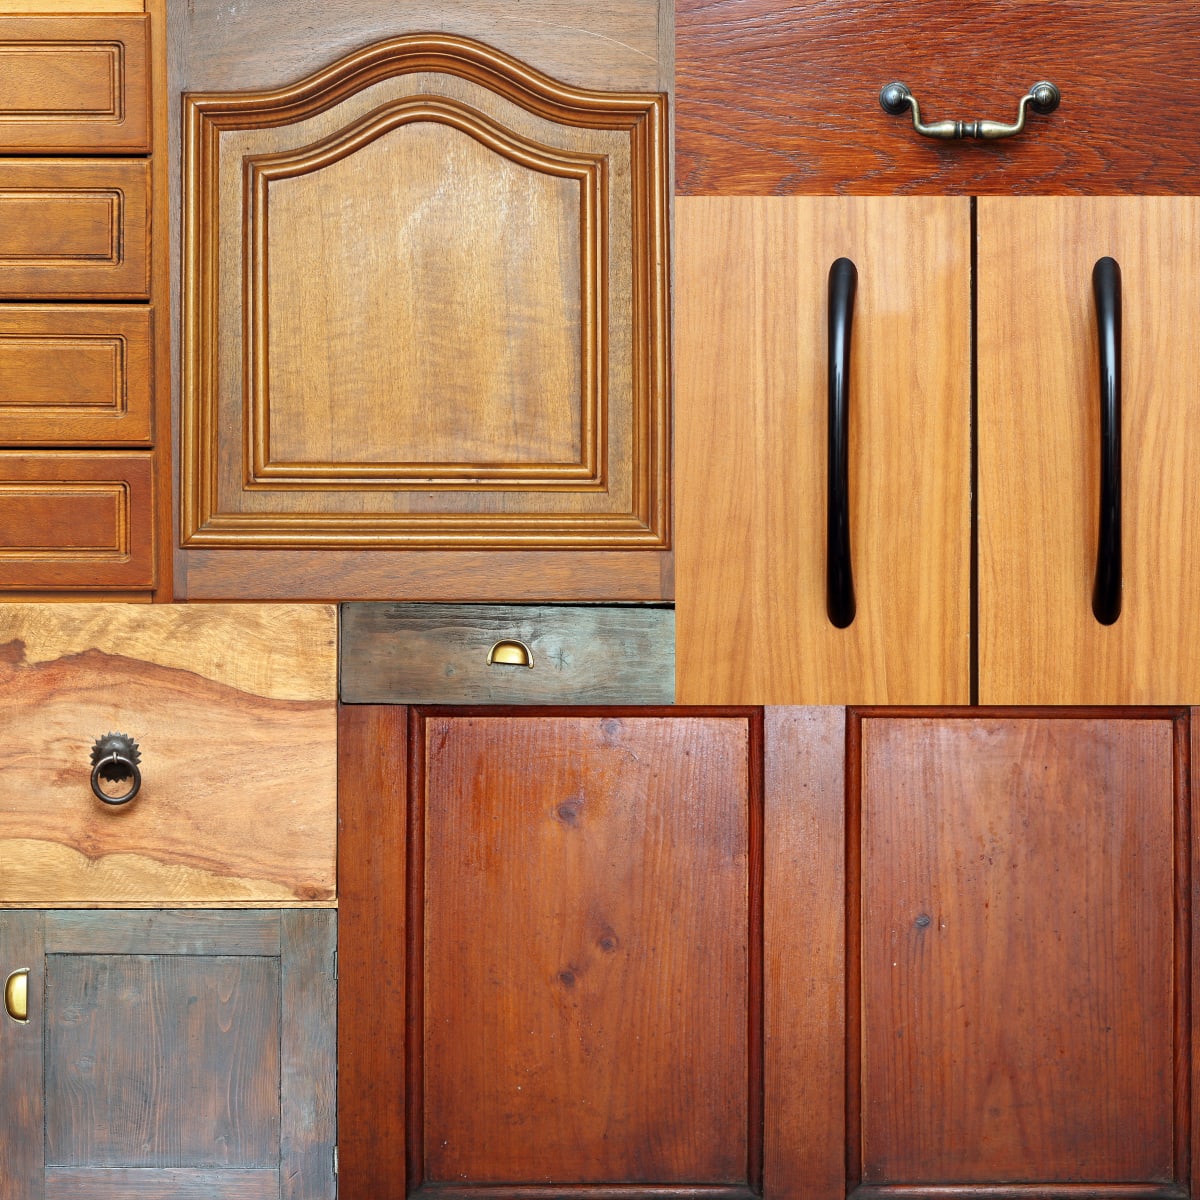 Lull Counterfeit Pen pal Outsourcing Doors, Drawers and More - Woodshop News